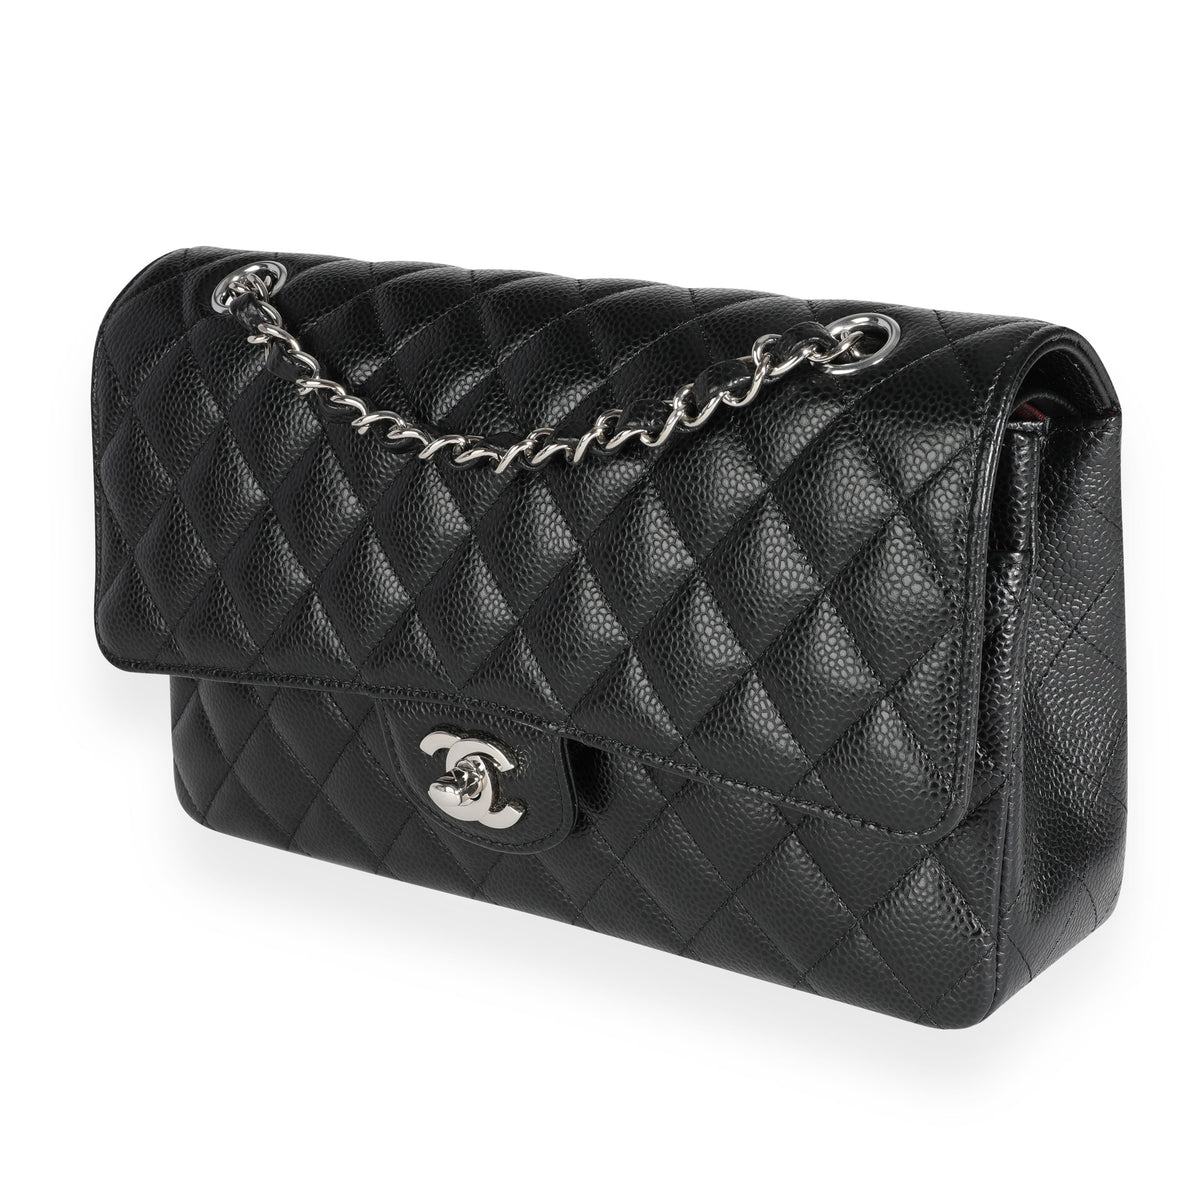 Chanel Black Caviar Quilted Medium Classic Double Flap Bag by WP